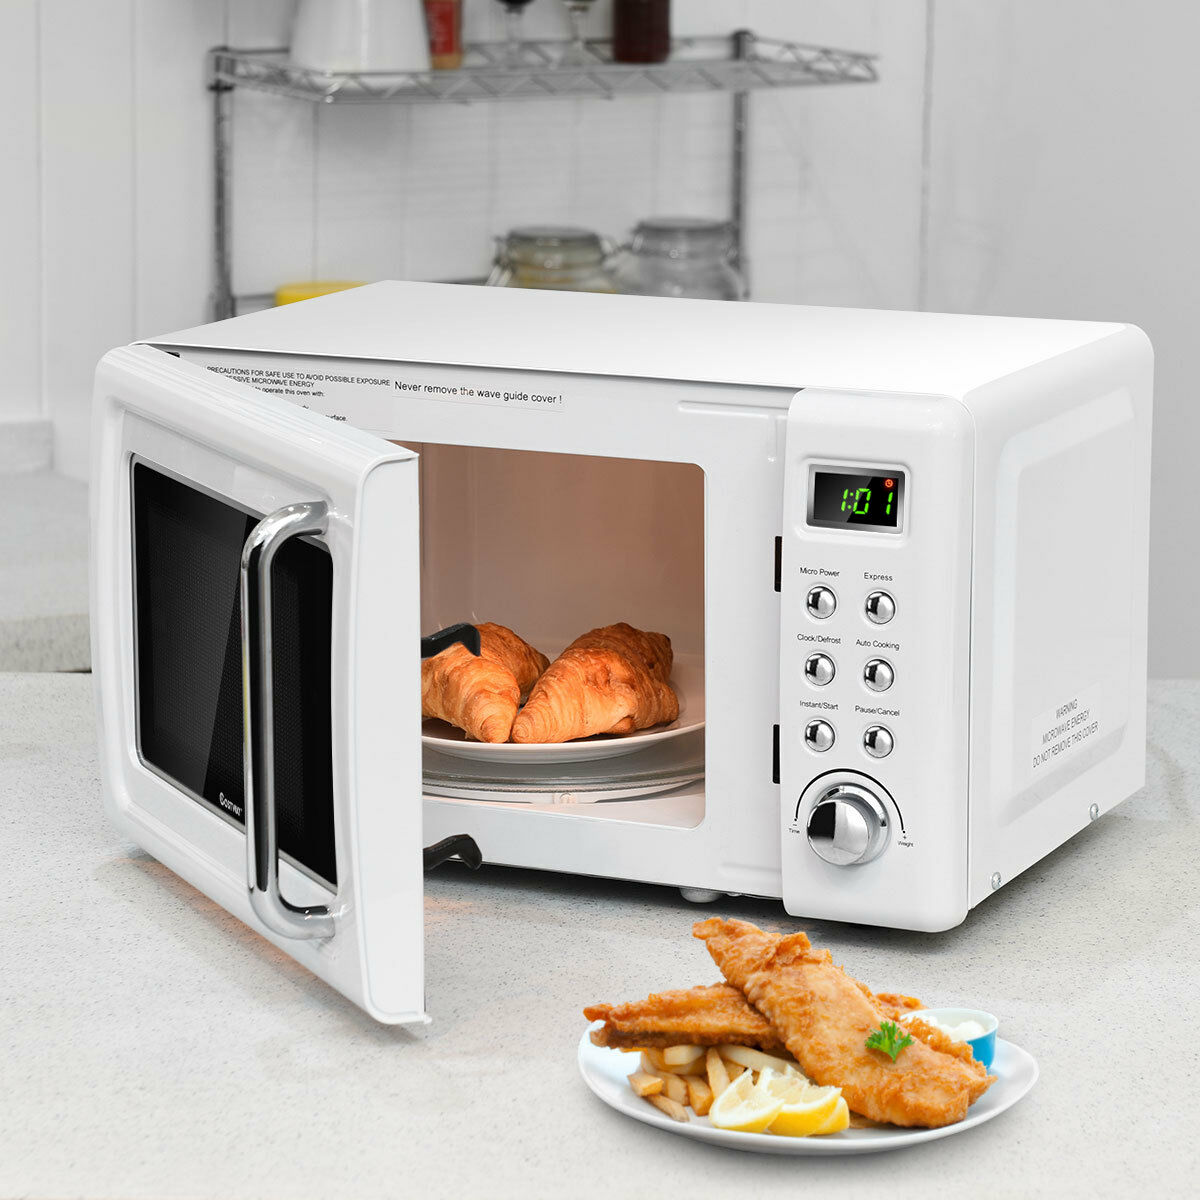 Costway 0.7Cu.ft Retro Countertop Microwave Oven 700W LED Display Glass  Turntable BlackWhite